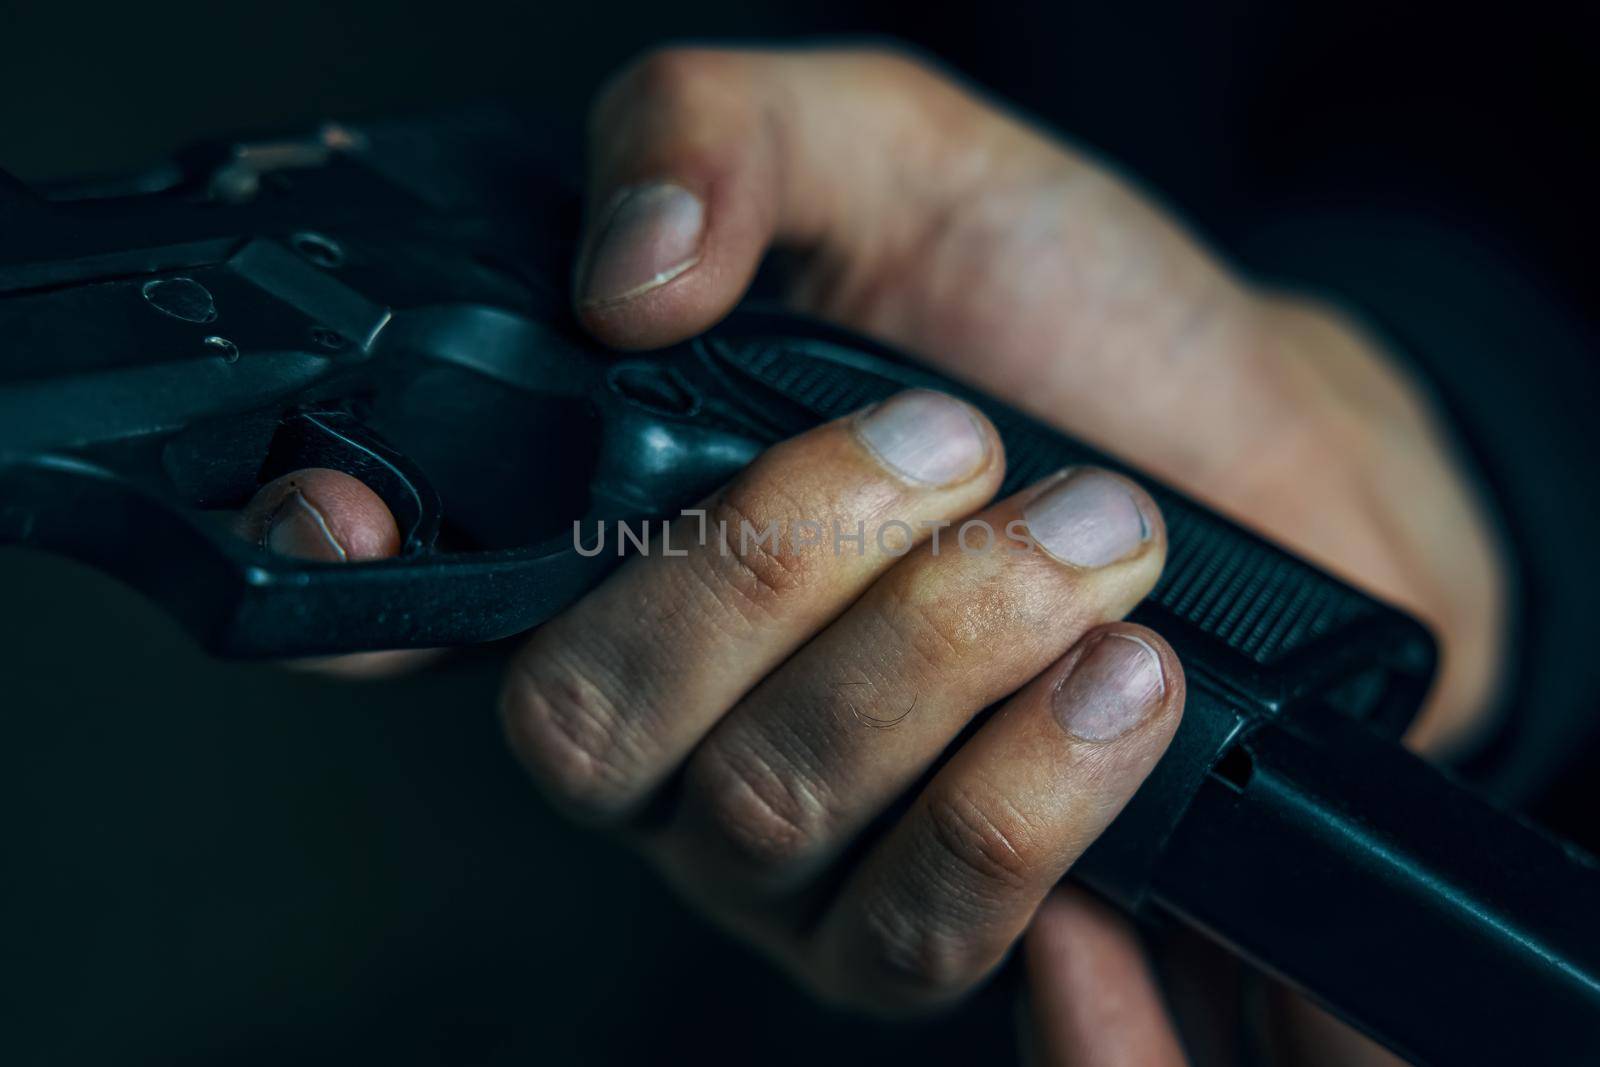 Man inserts drum of cartridges into pistol. Reloading gun close-up. Firearms in hand on dark background. Defense or attack.